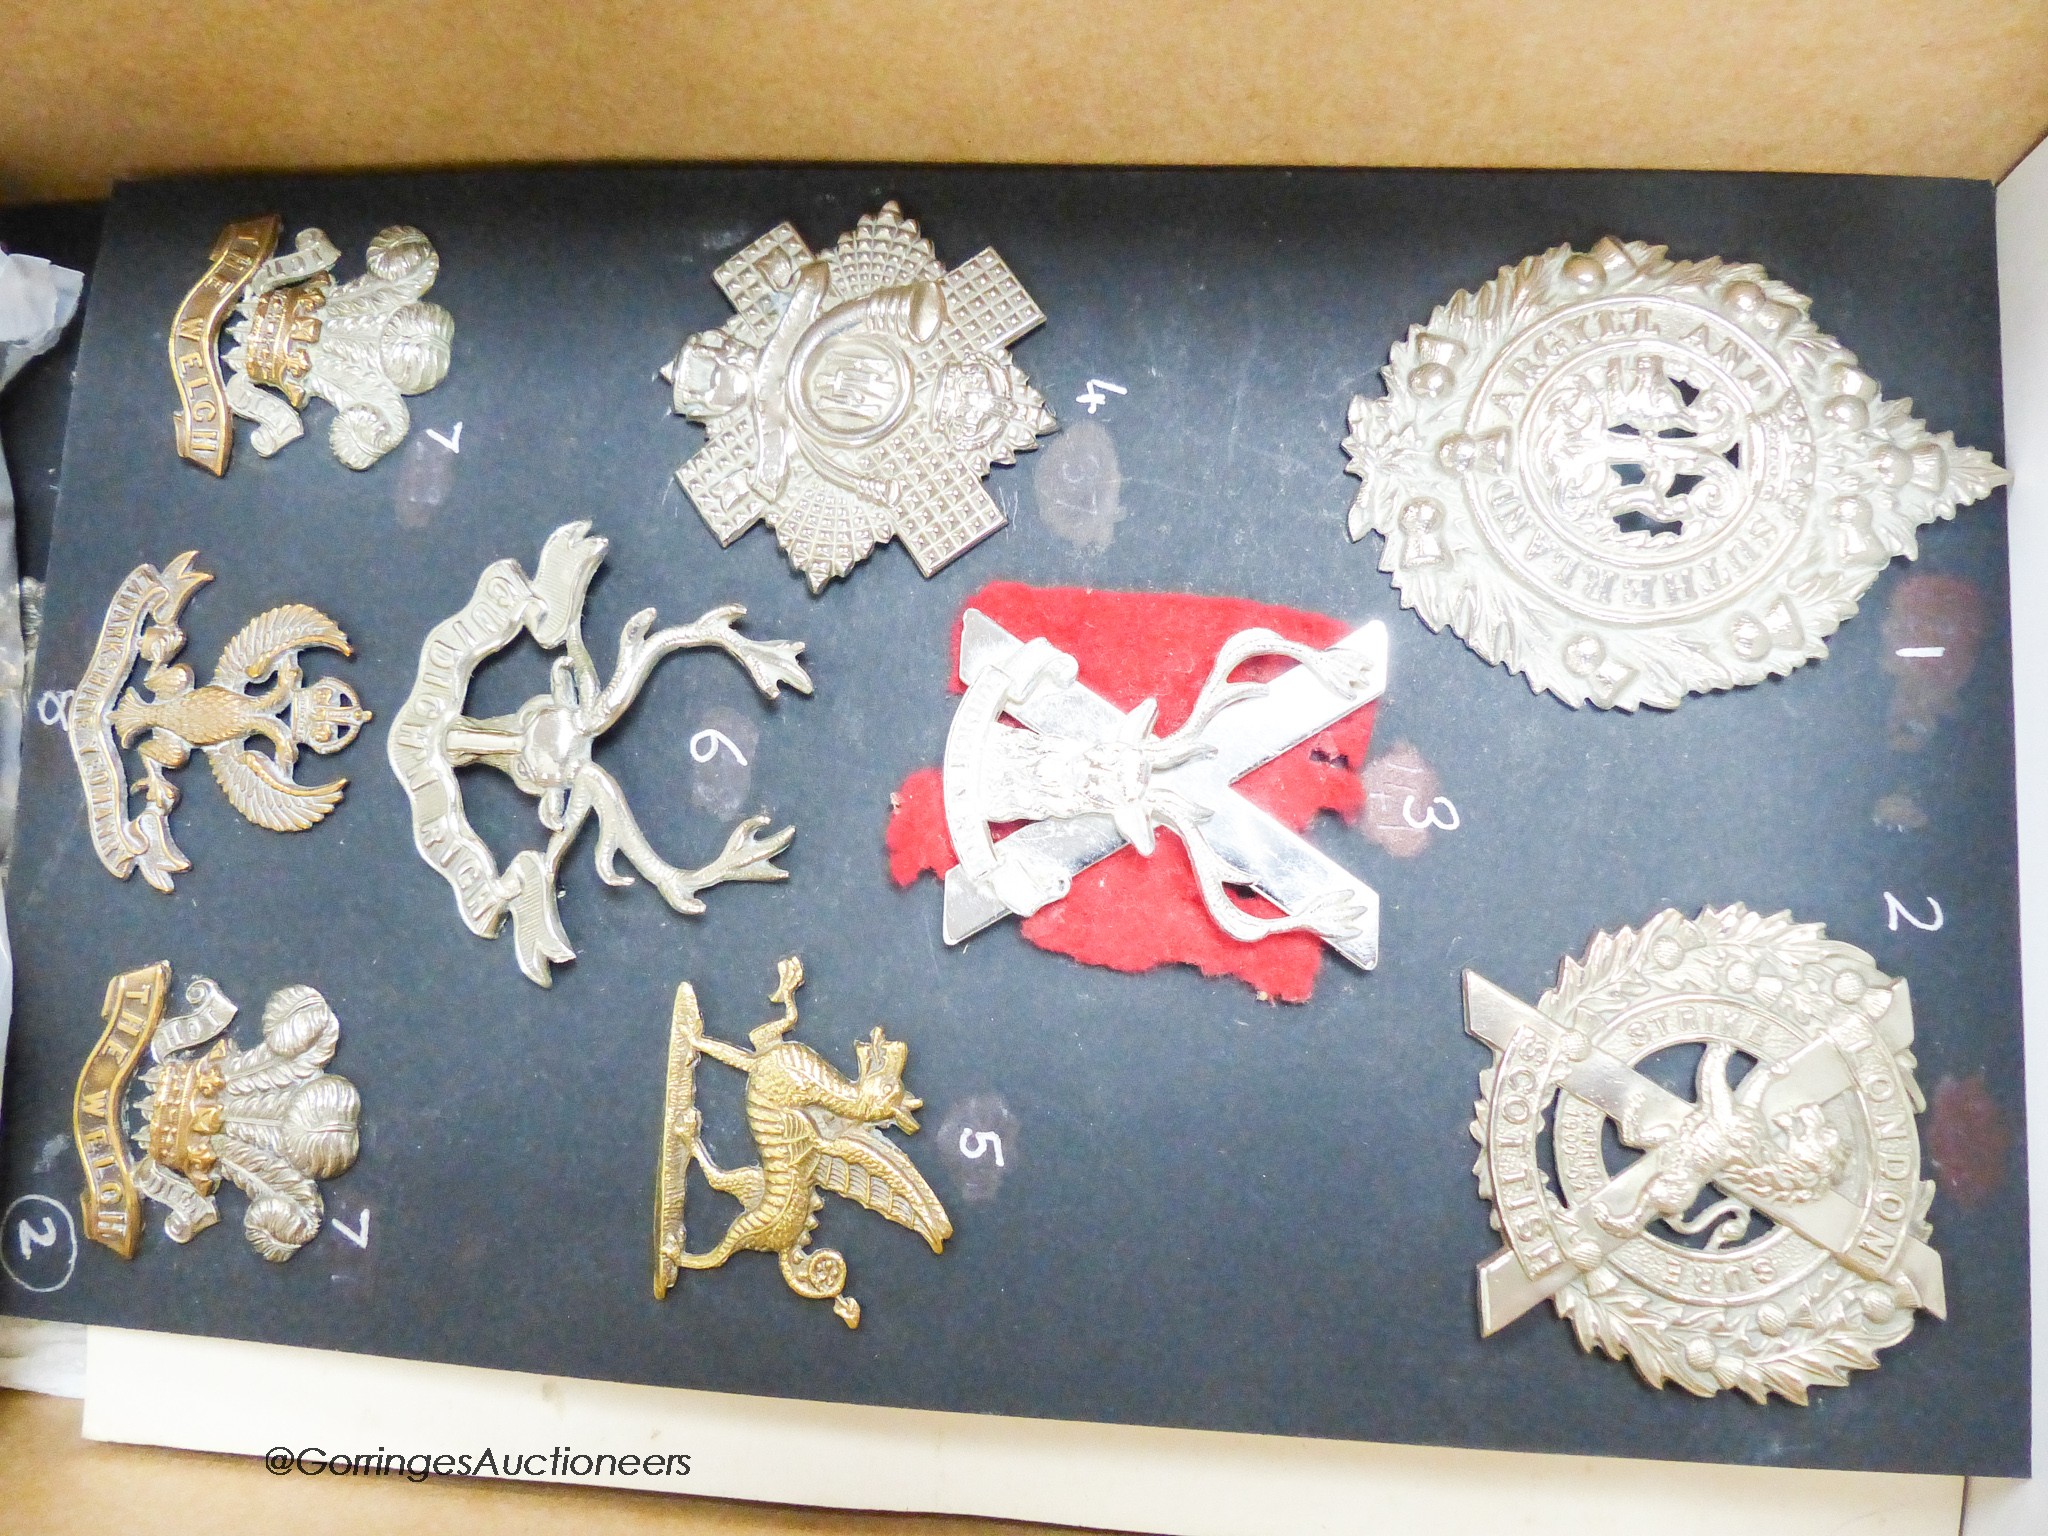 A collection of Military cap badges